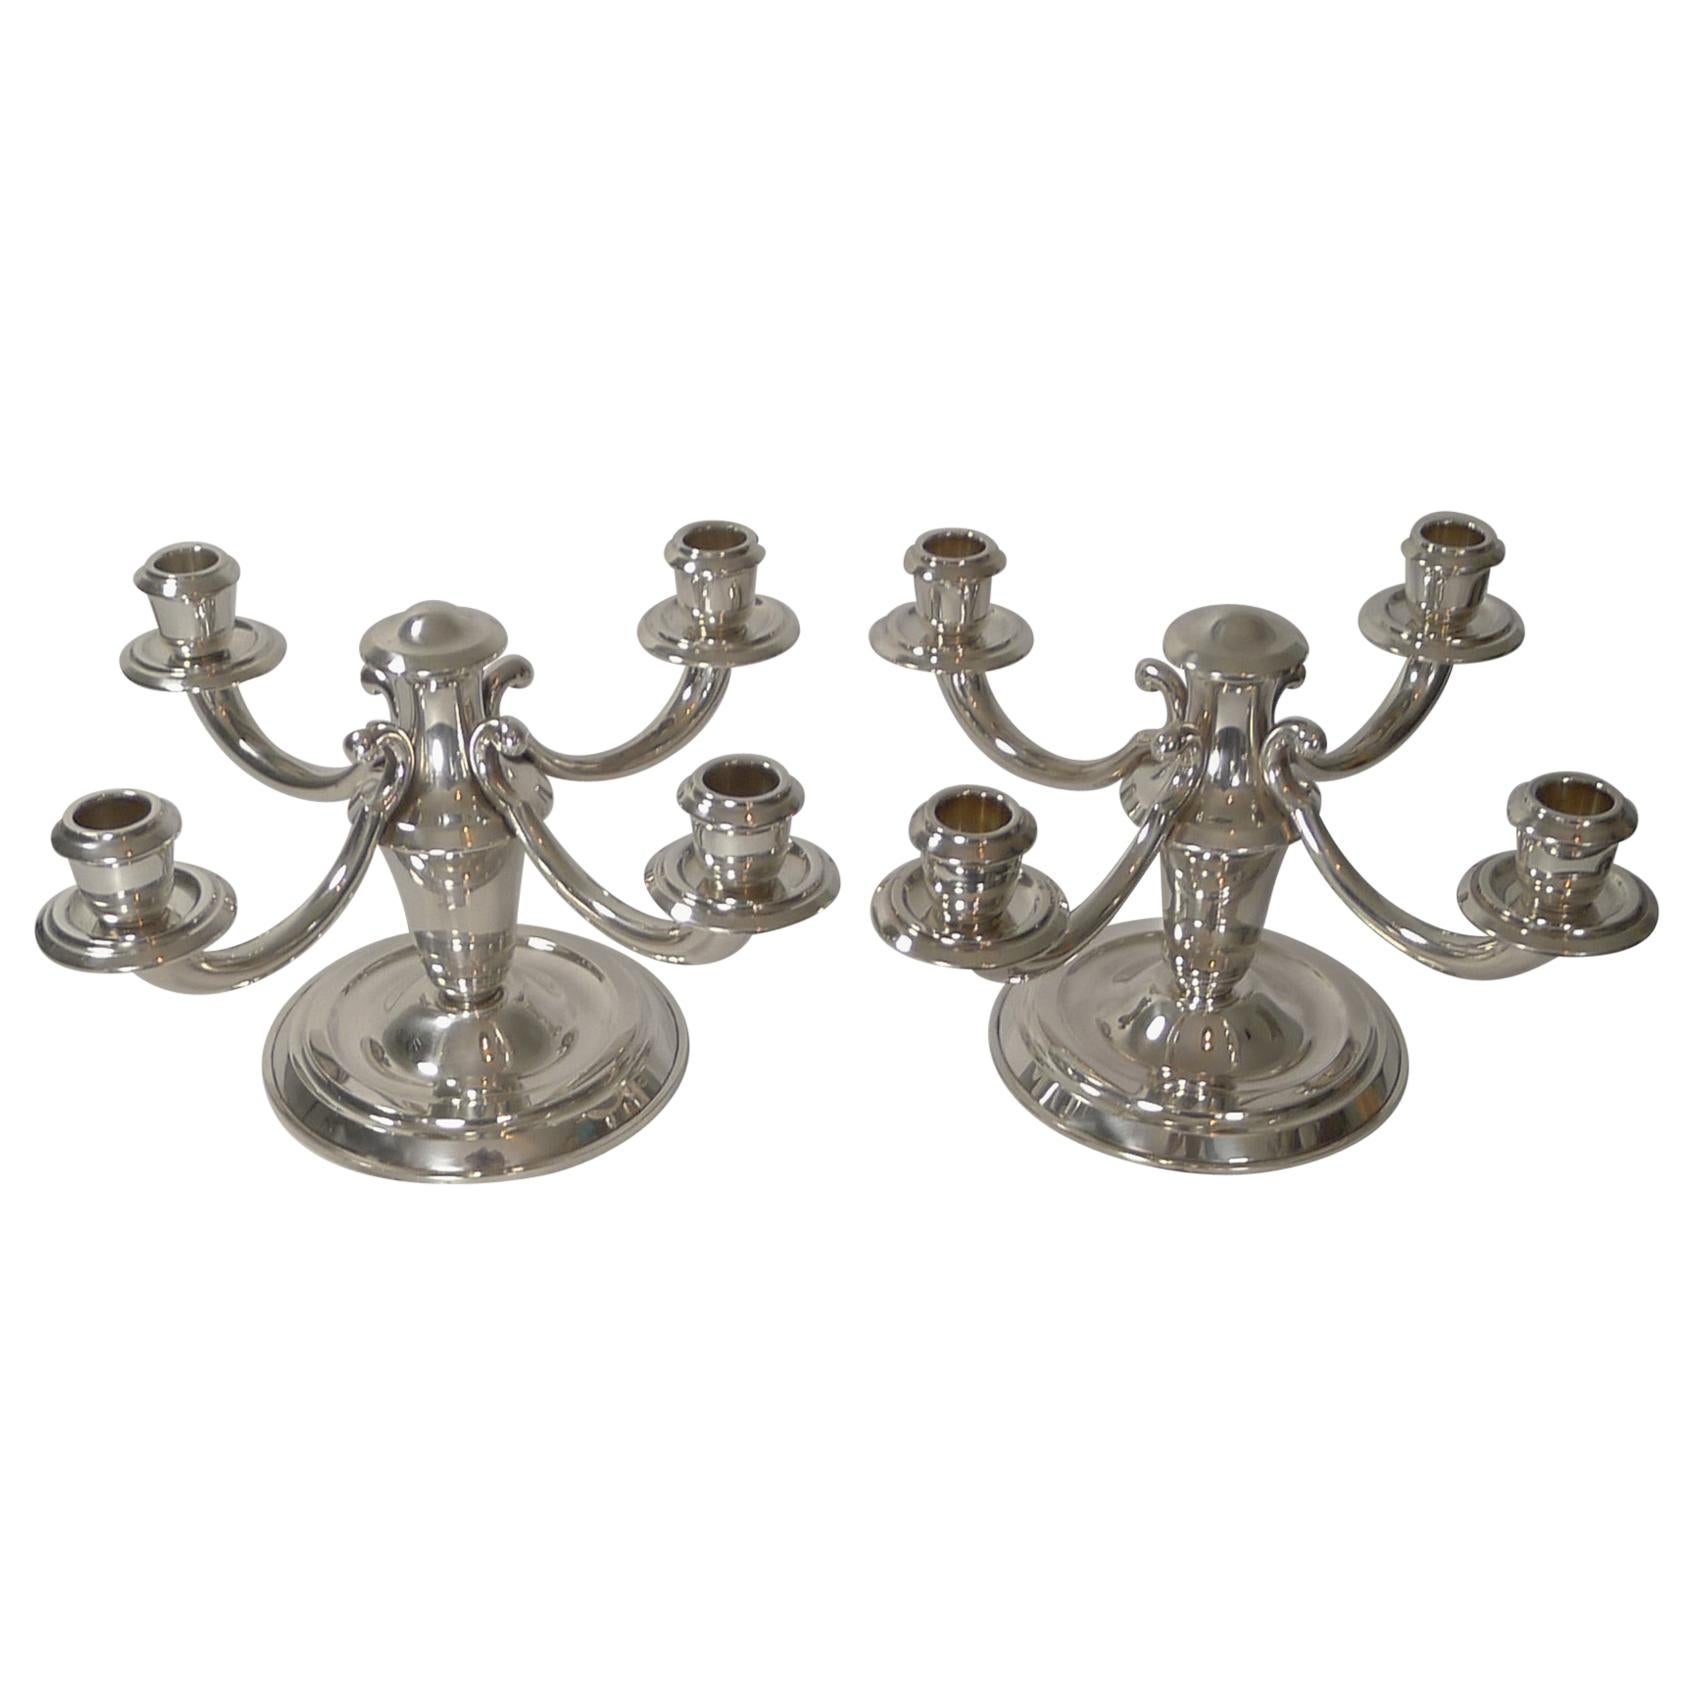 Pair of French Art Deco Candelabra in Silver Plate by Ravinet d'Enfert